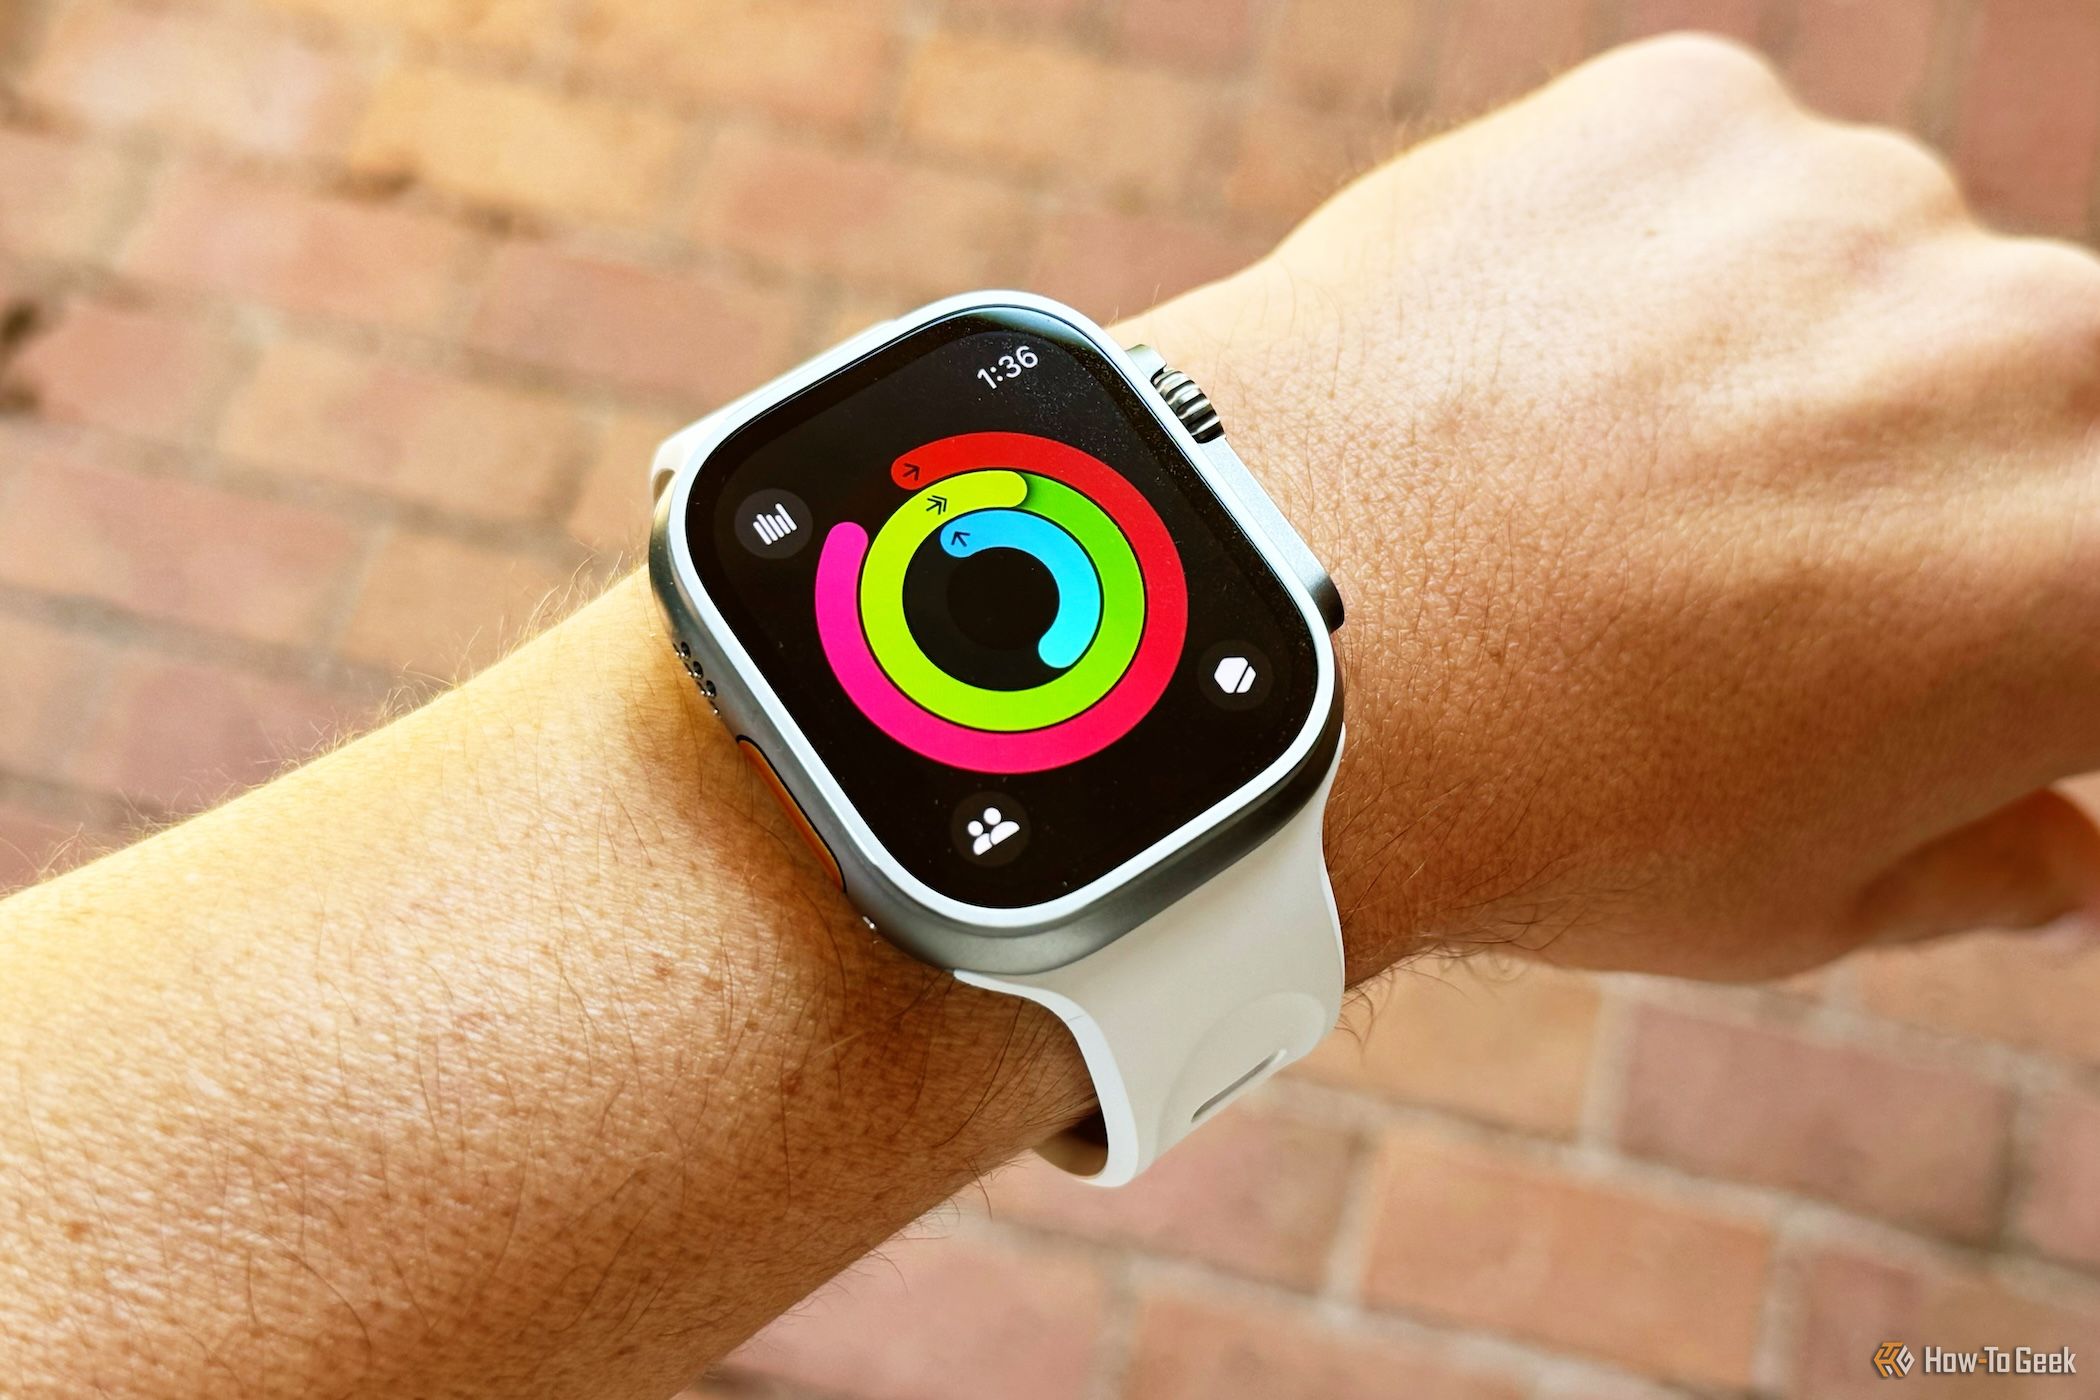 The 10 Most Common Apple Watch Problems and How to Fix Them